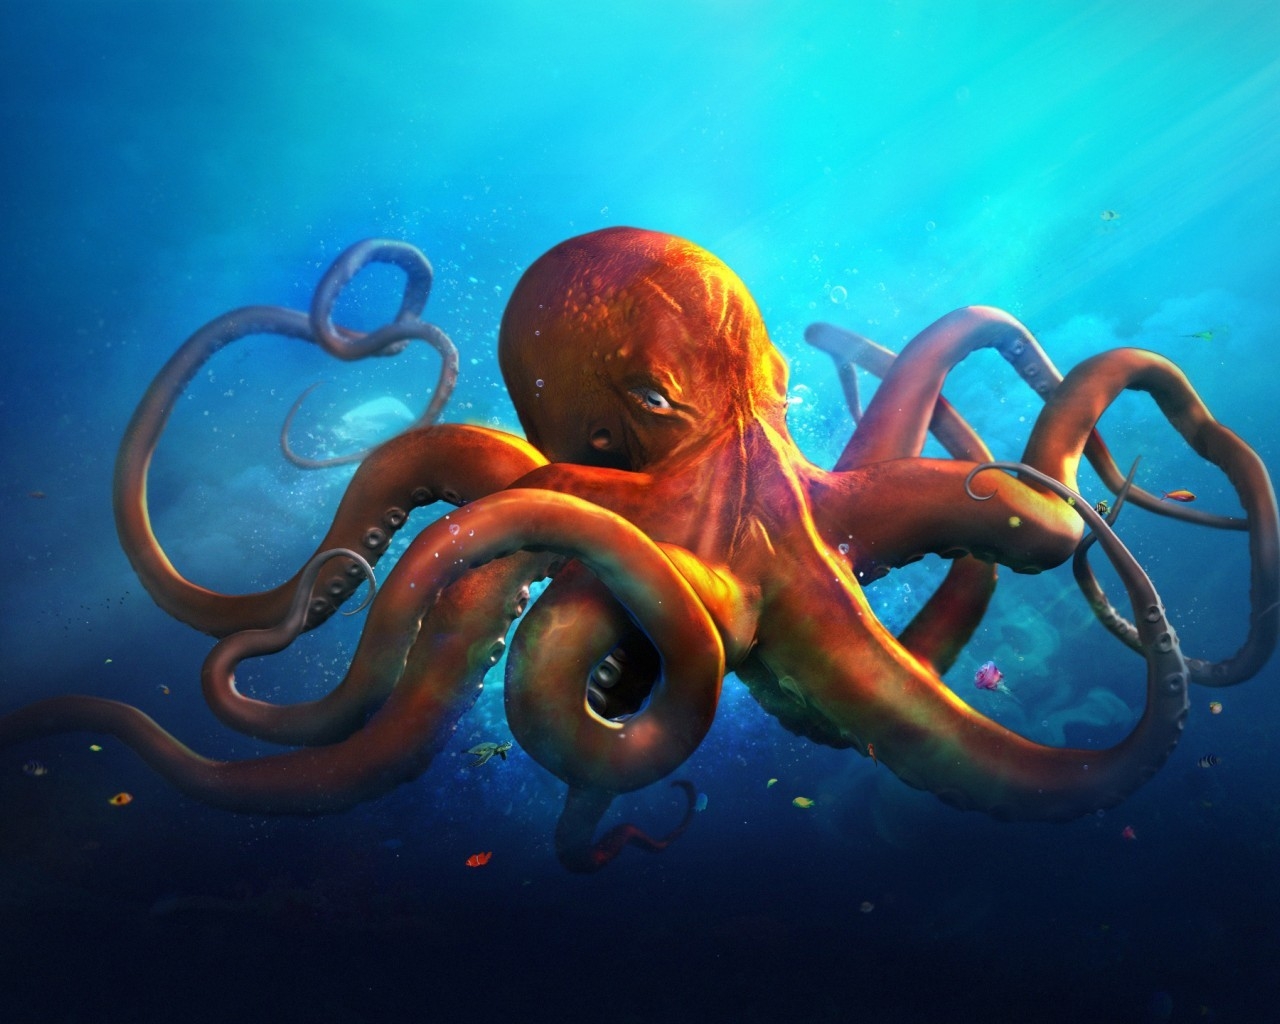 Just an Octopus for 1280 x 1024 resolution